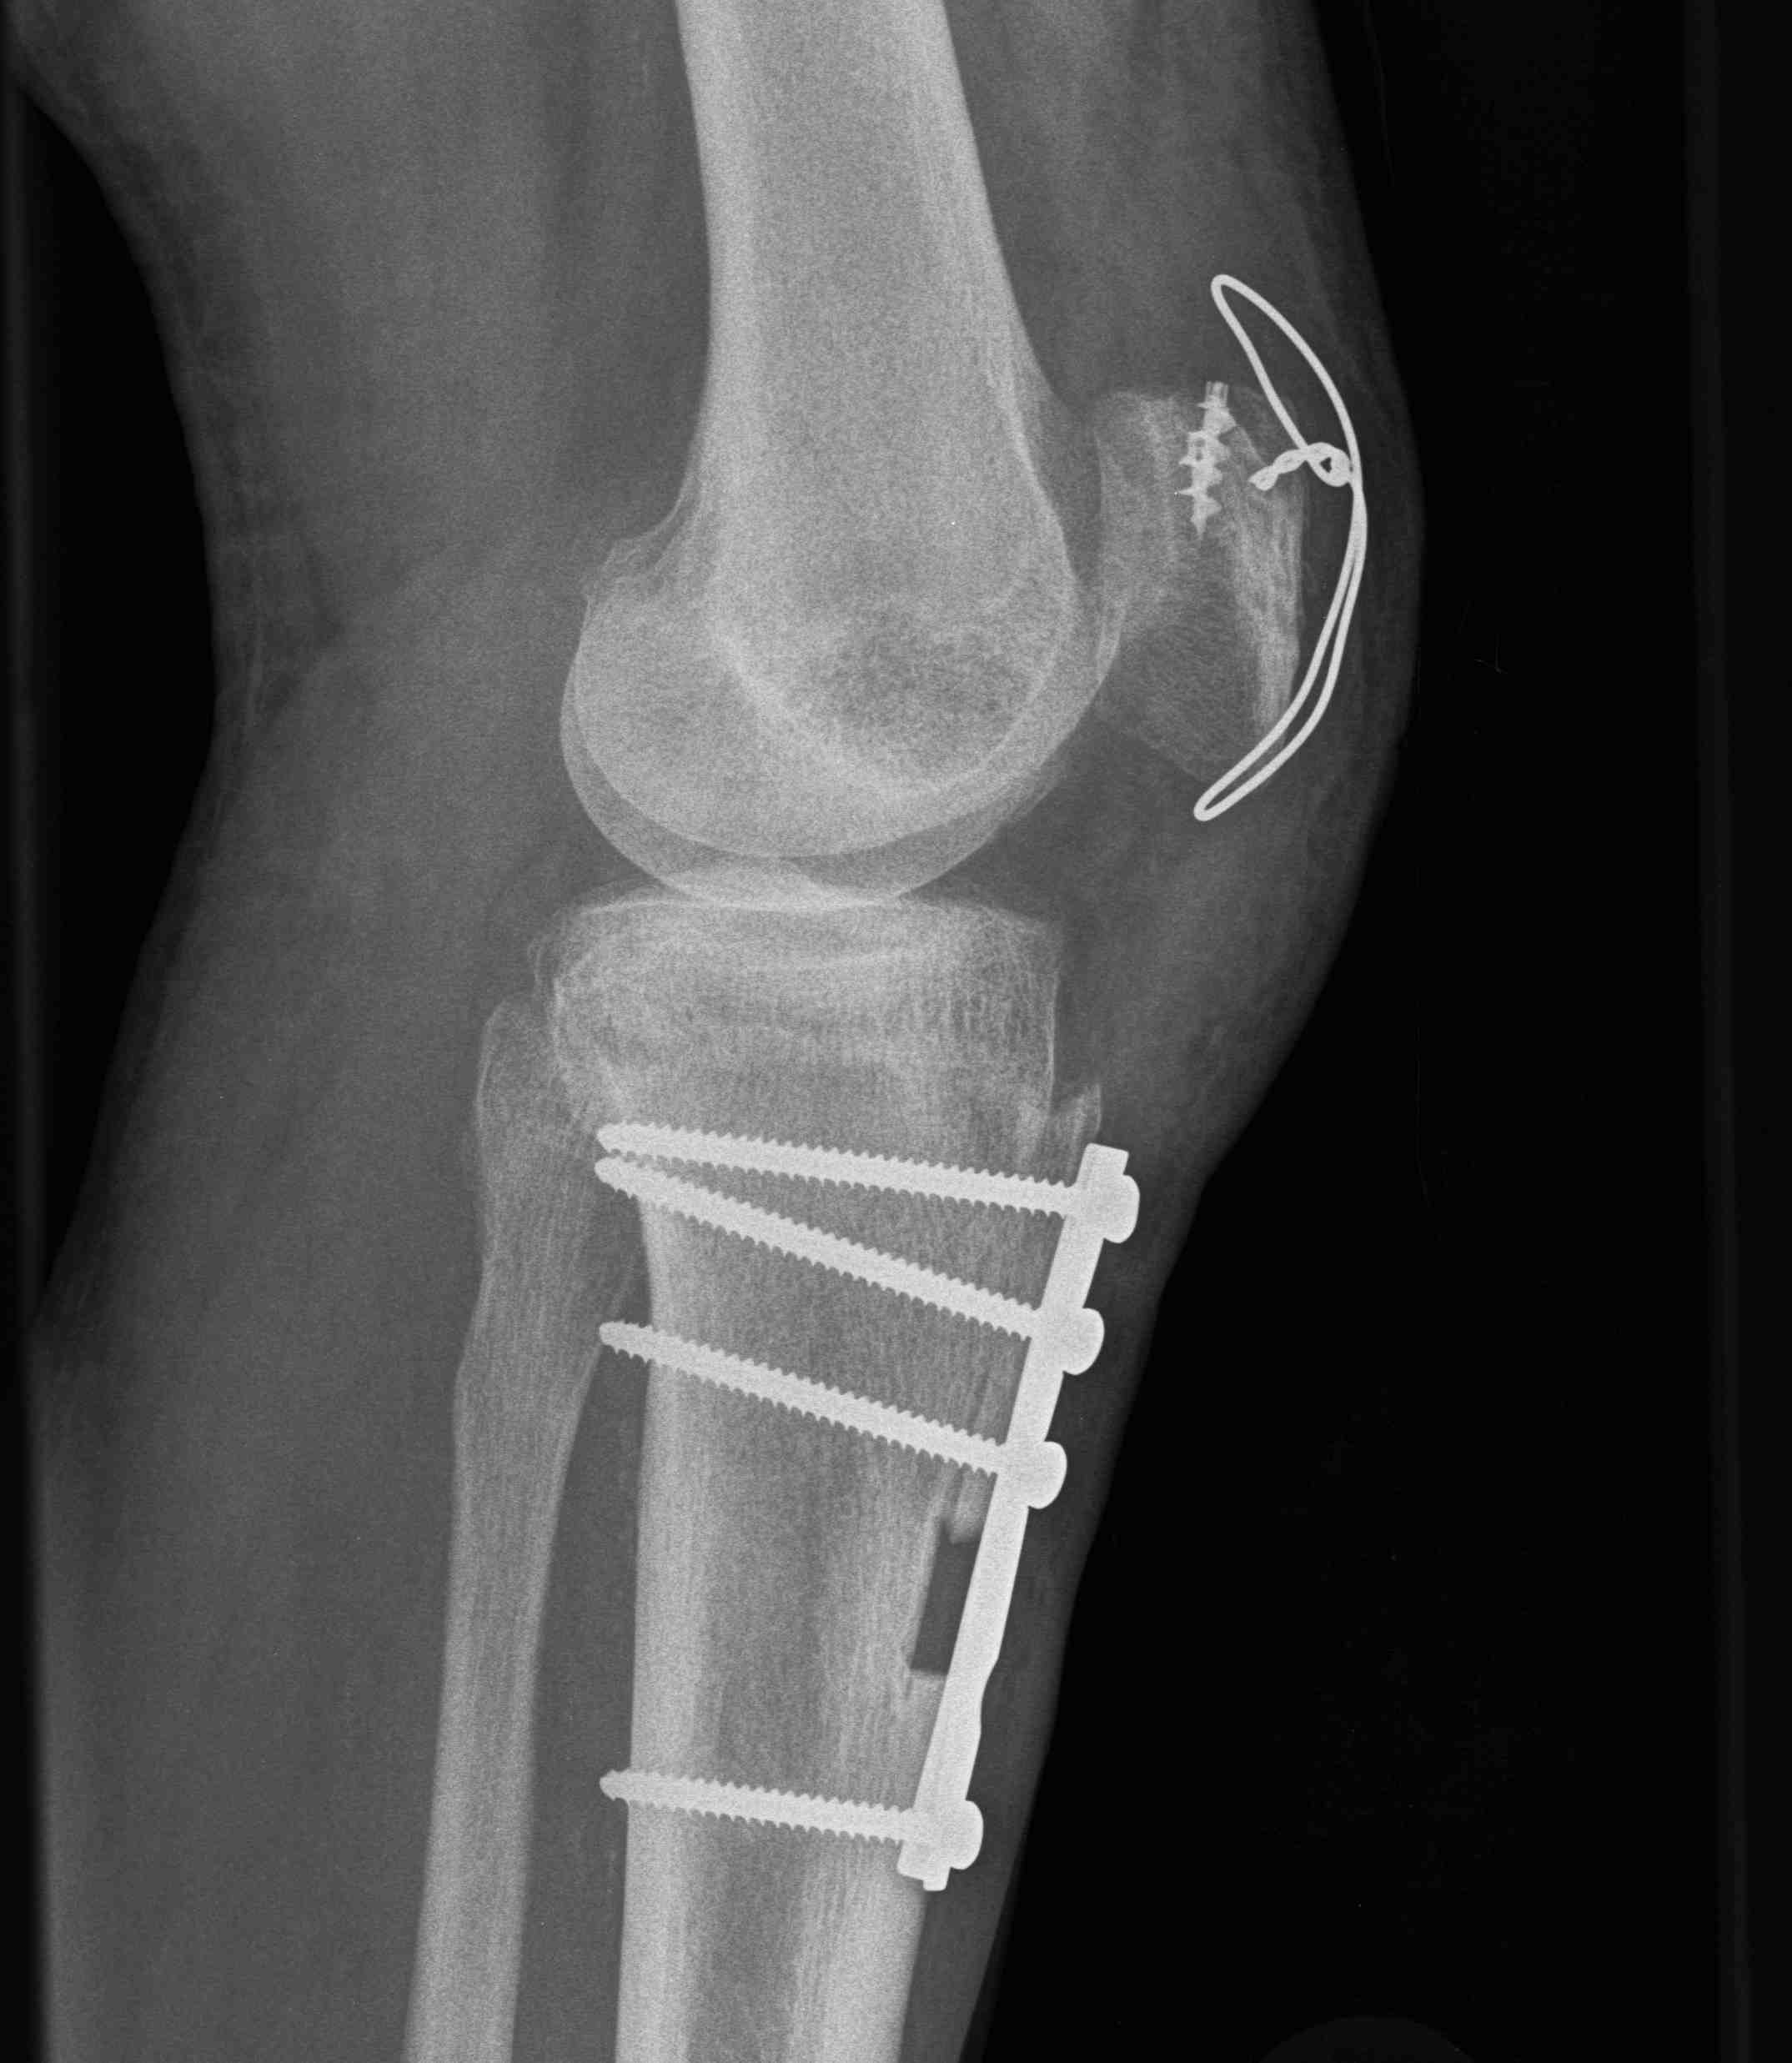 Revision Quadriceps Repair with Tibial Tuberosity Osteotomy